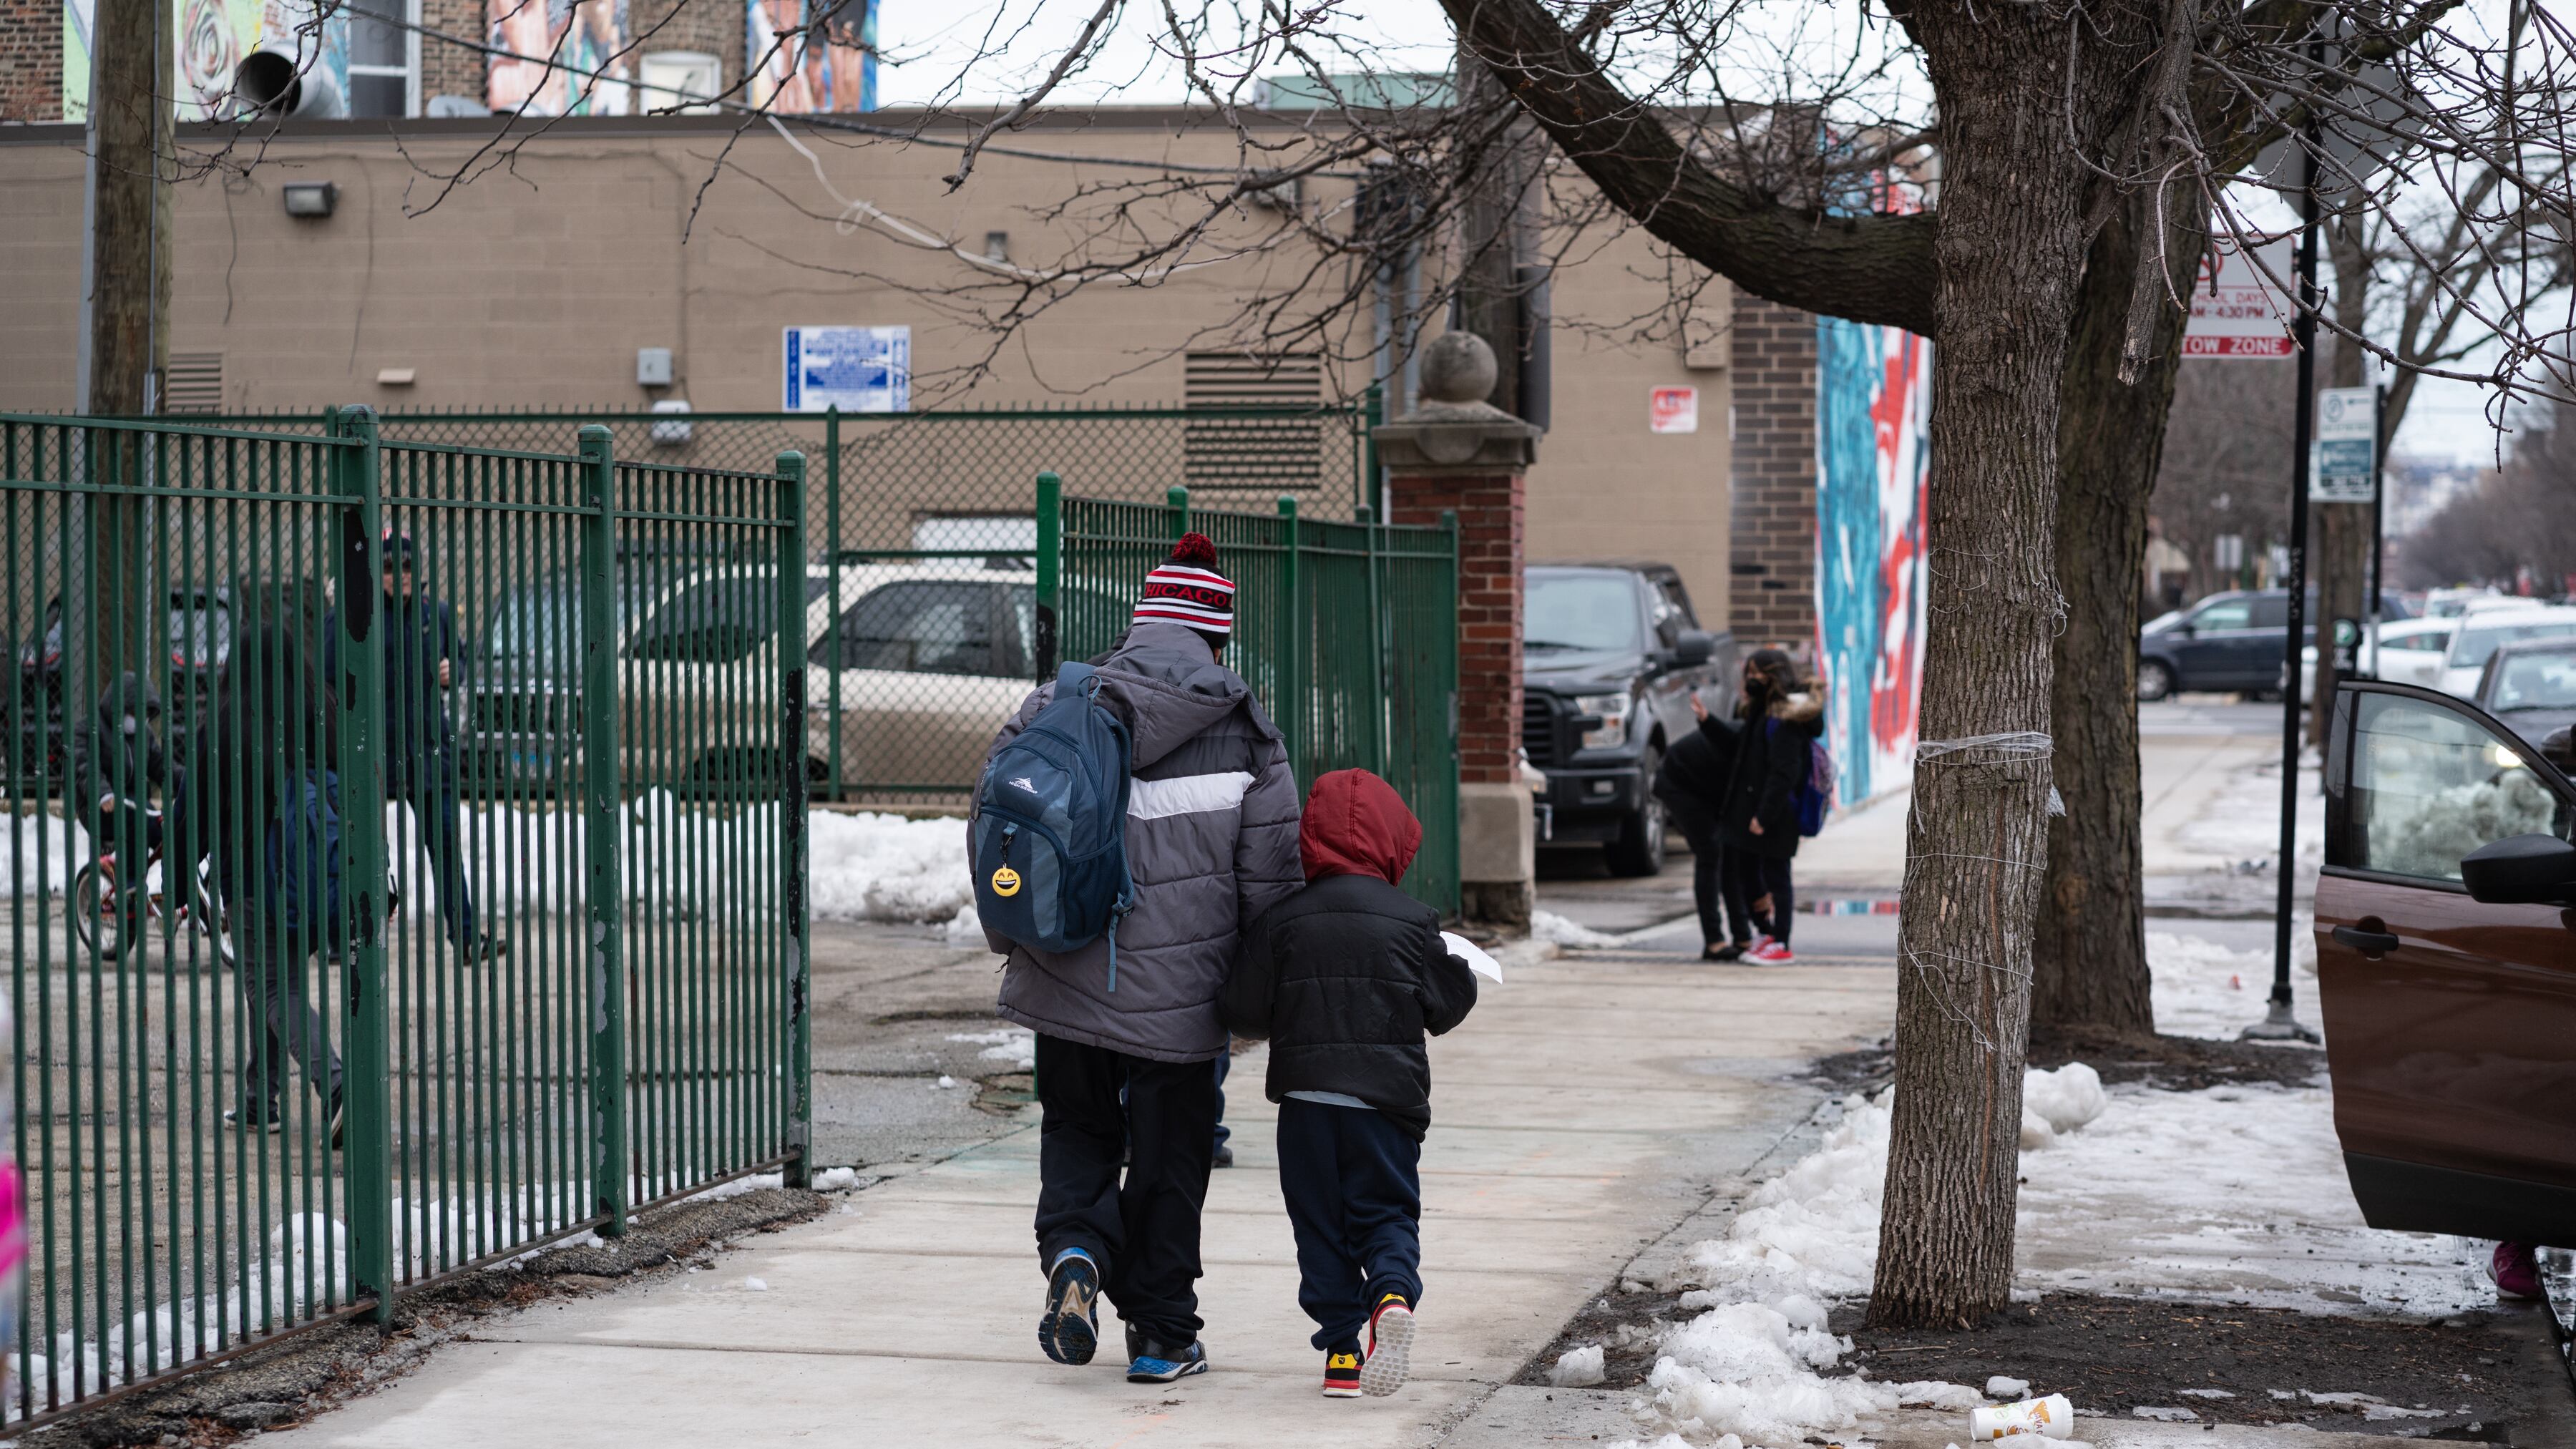 A man and a child in winter coats walk on the sidewalk by a school building.